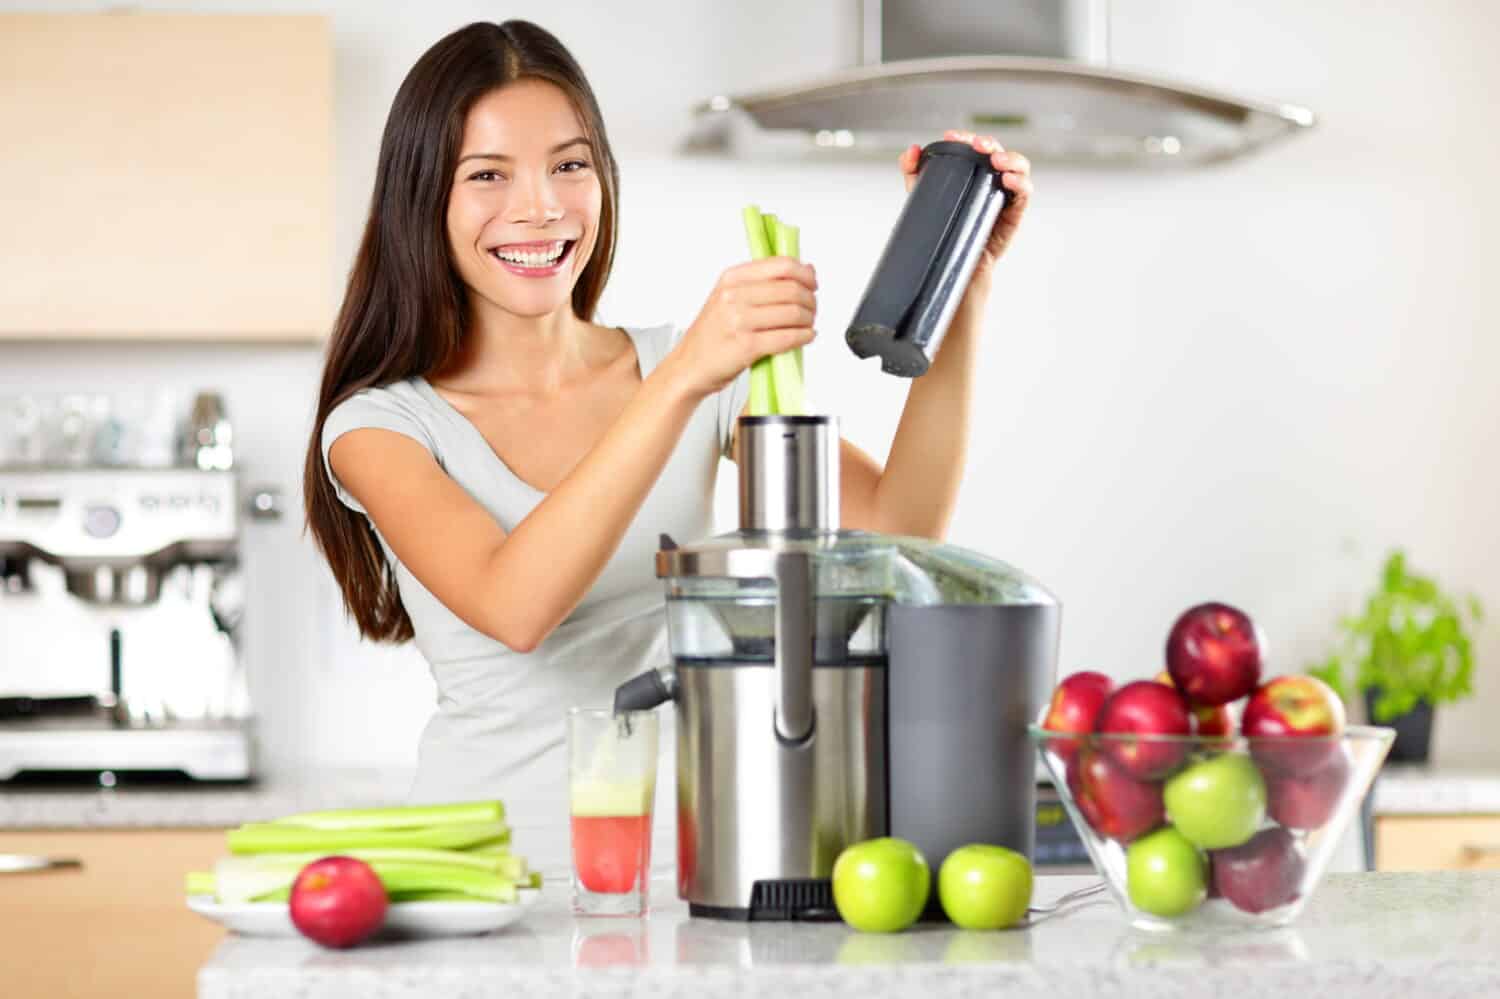 Vegetable juice raw food - healthy eating woman with juicer juicing green vegetables and apple fruits as part of her wellness food. Beautiful happy mixed Asian woman with juice maker in kitchen.